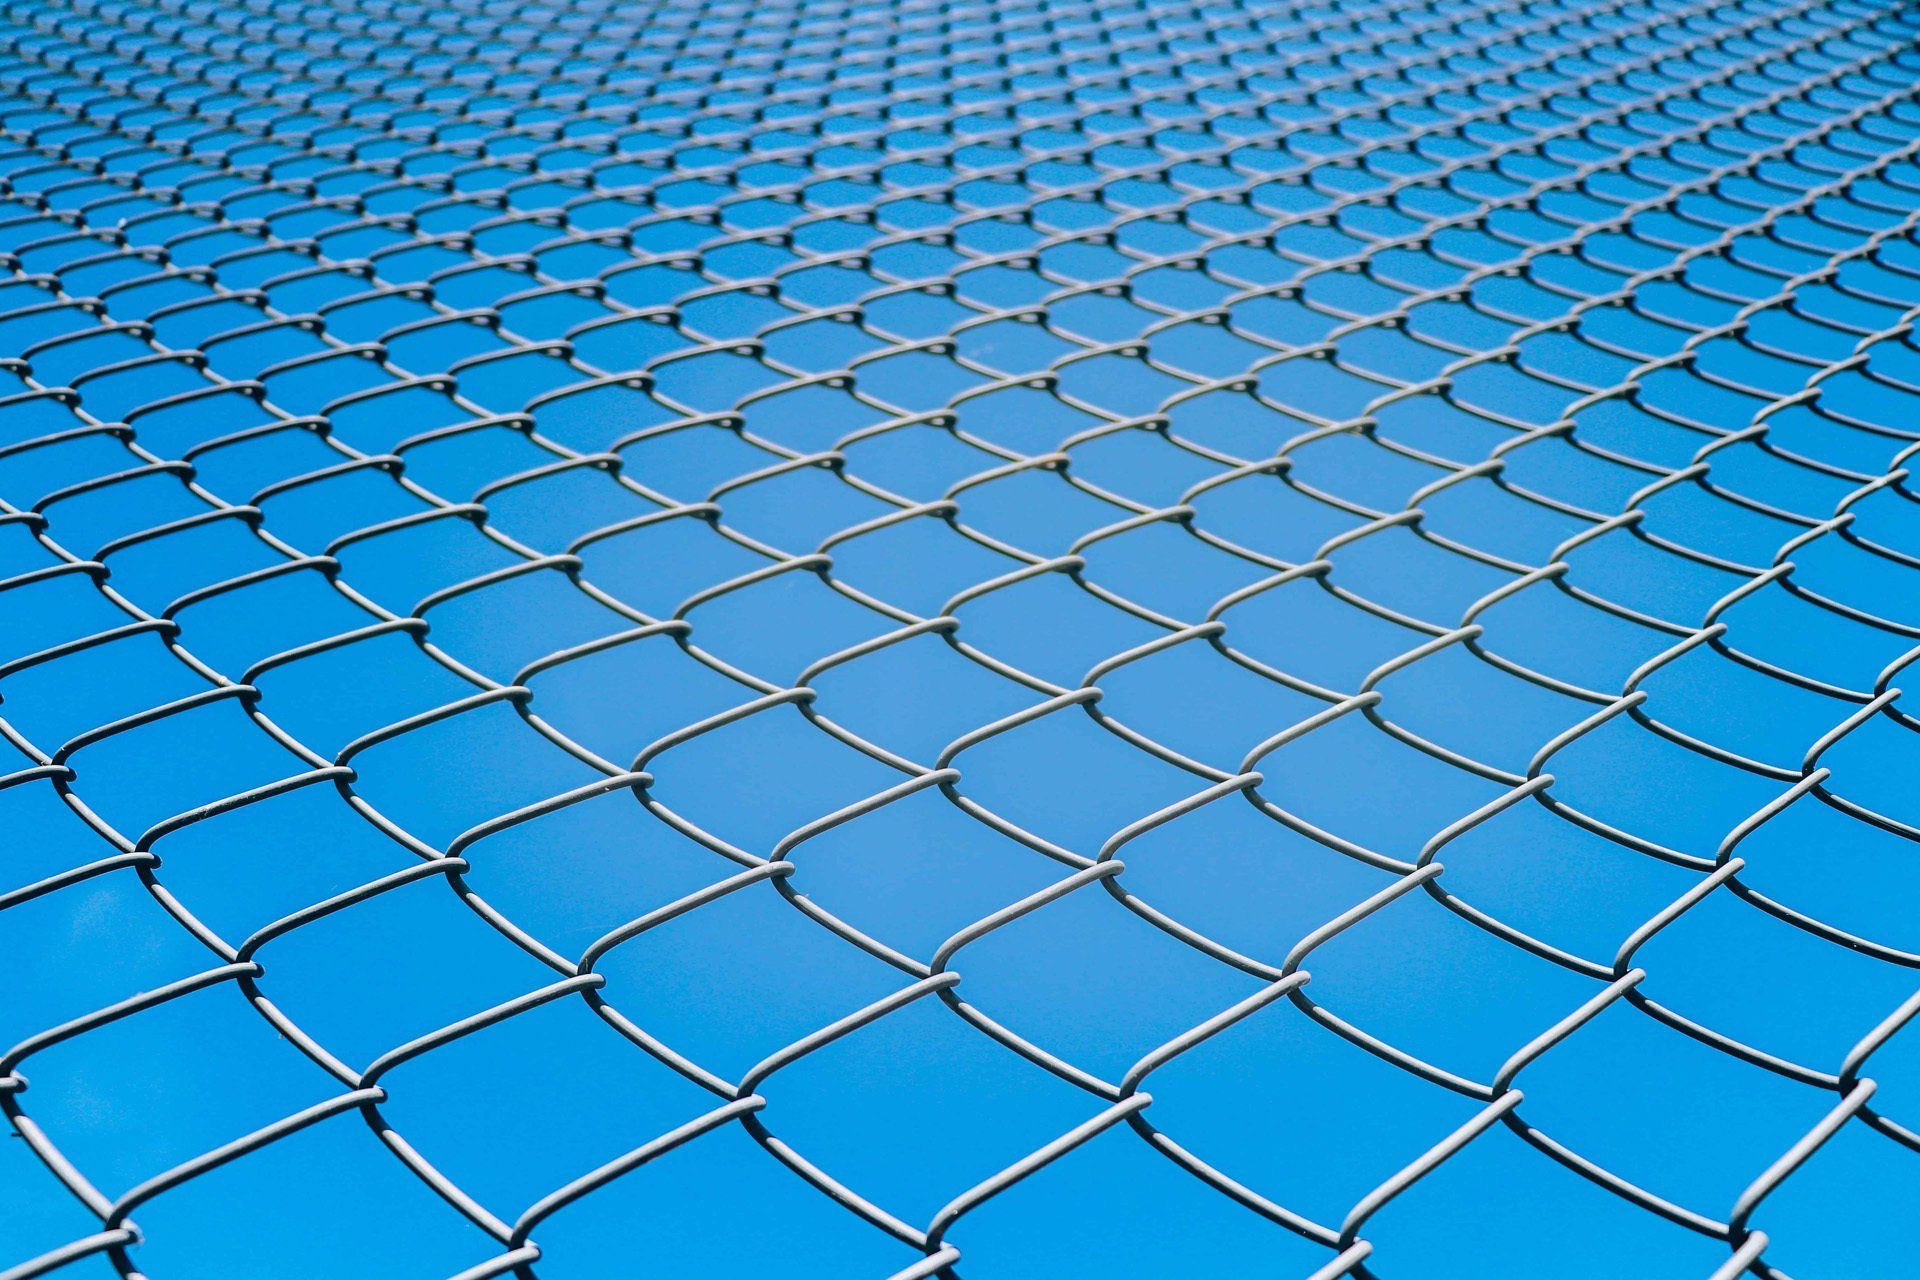 Composite chain link fencing solution